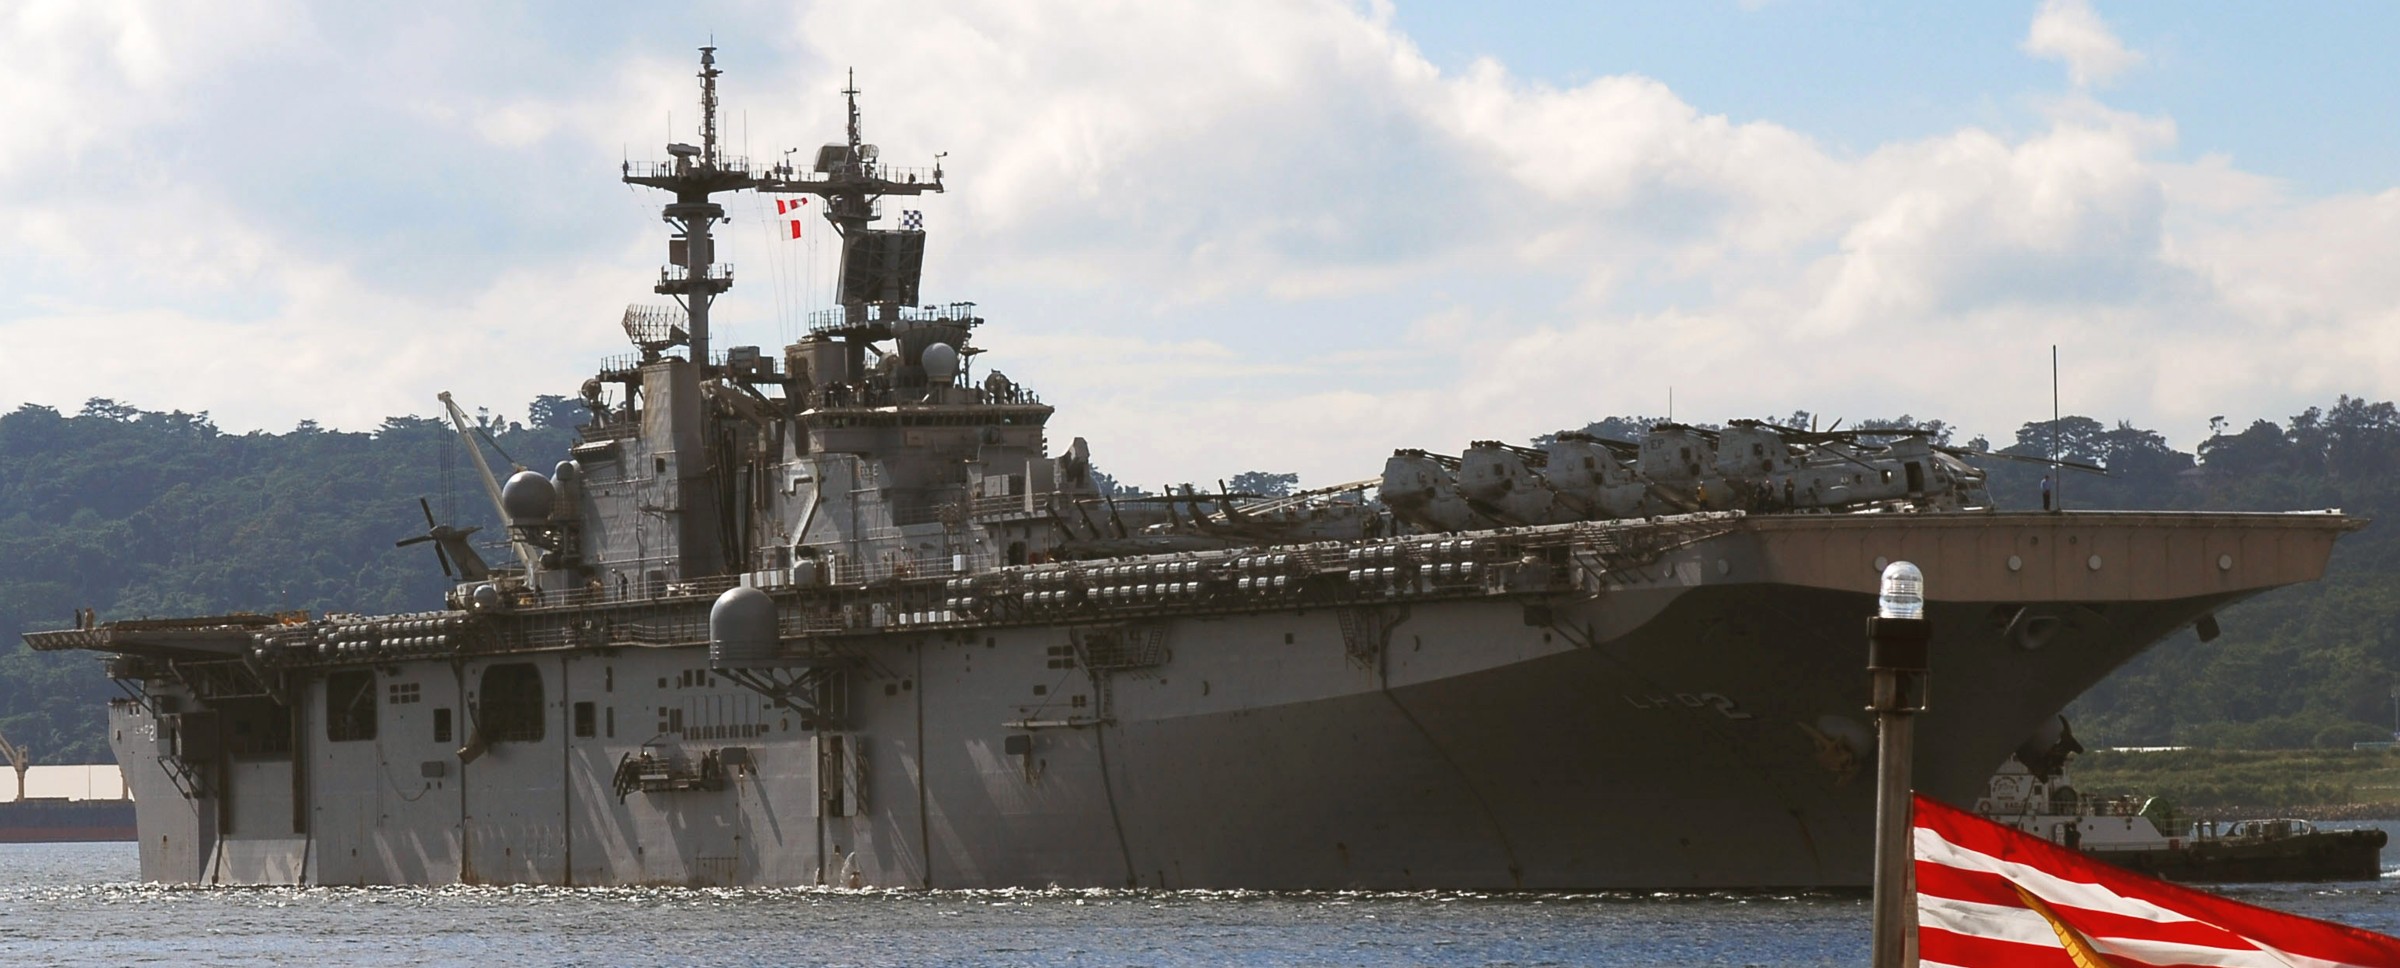 lhd-2 uss essex wasp class amphibious assault ship landing helicopter us navy departing sasebo 50